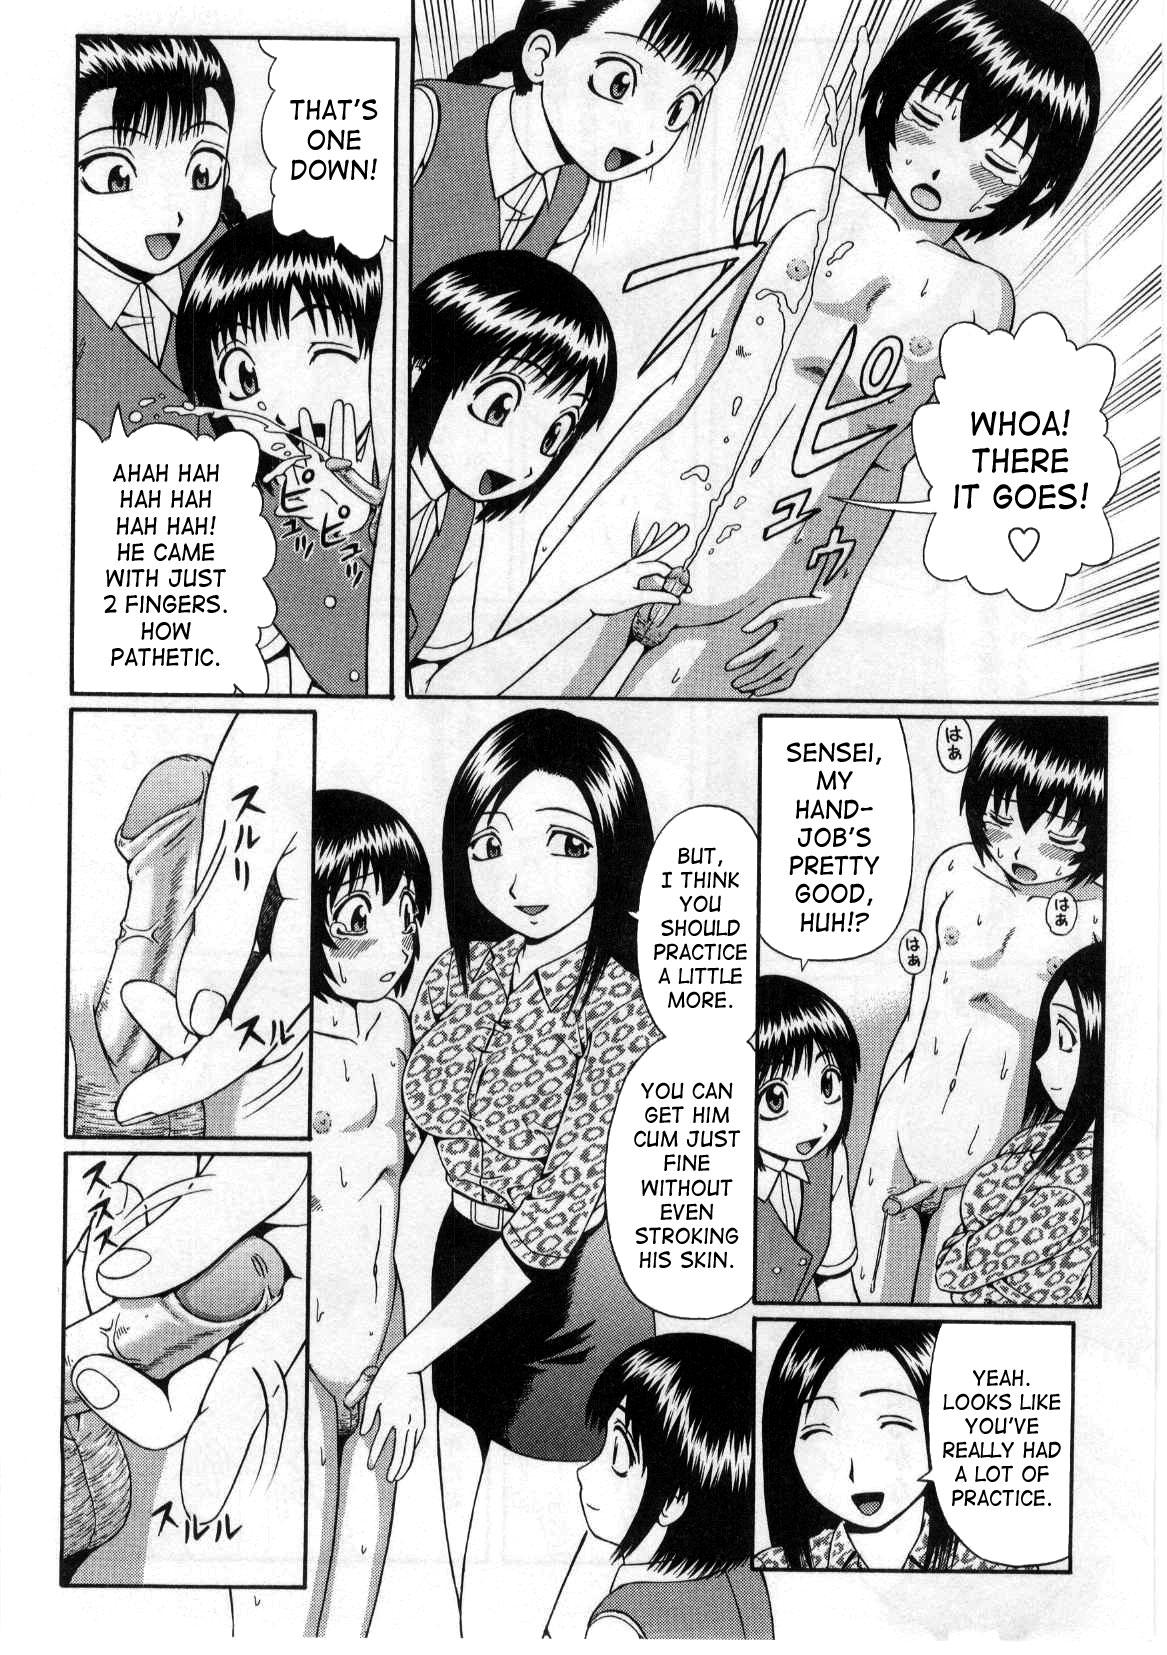 Chacal Suisen no Jouken | Condition of Recommendation Oil - Page 6